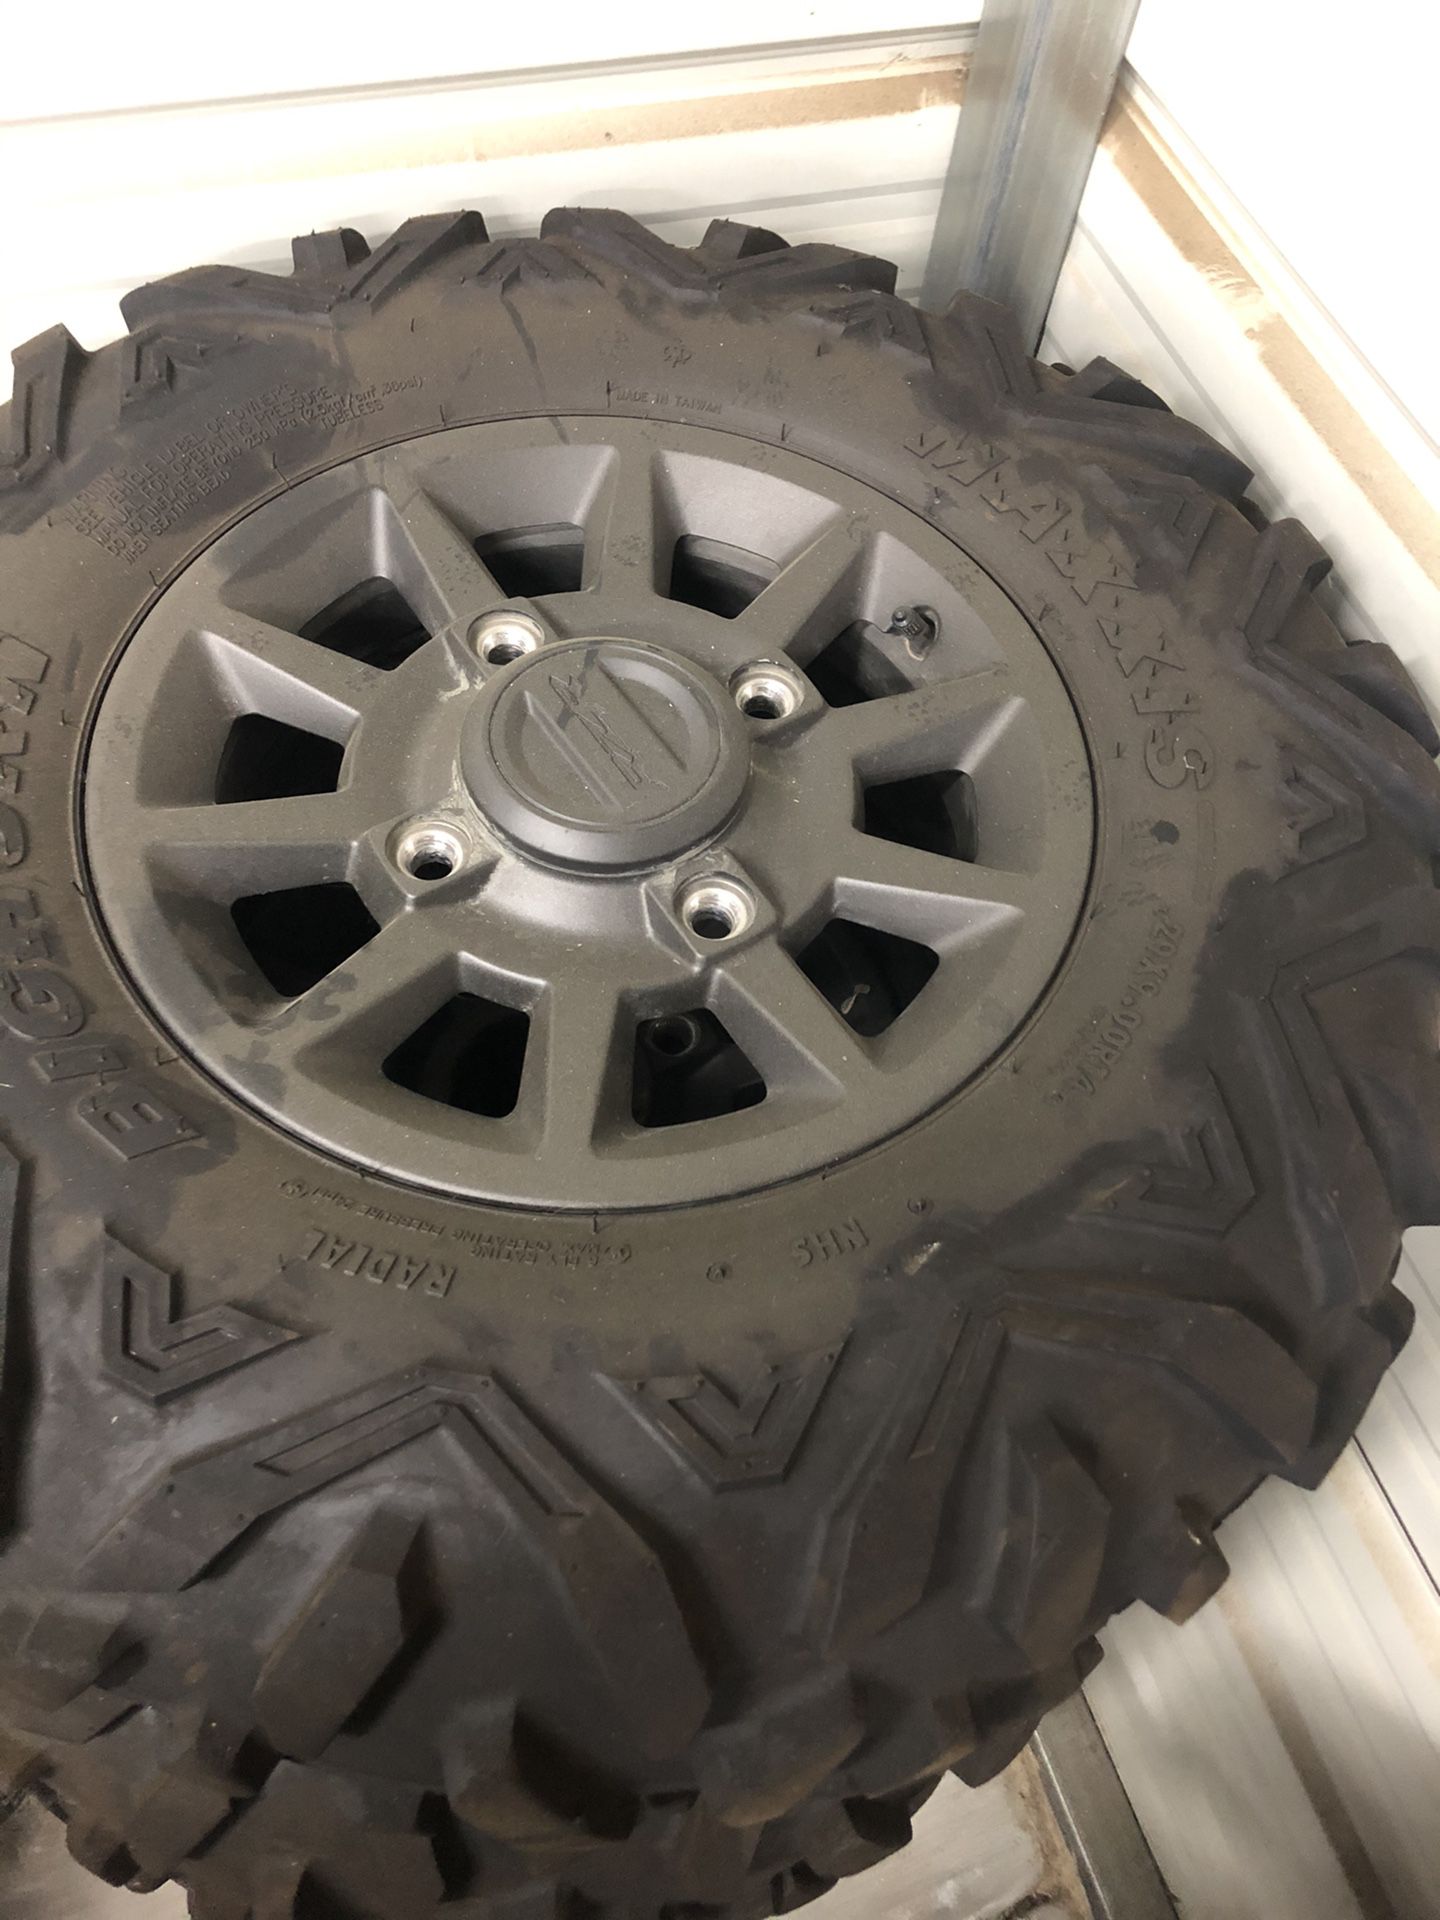 Stock 18 turbo rzr wheels and tires